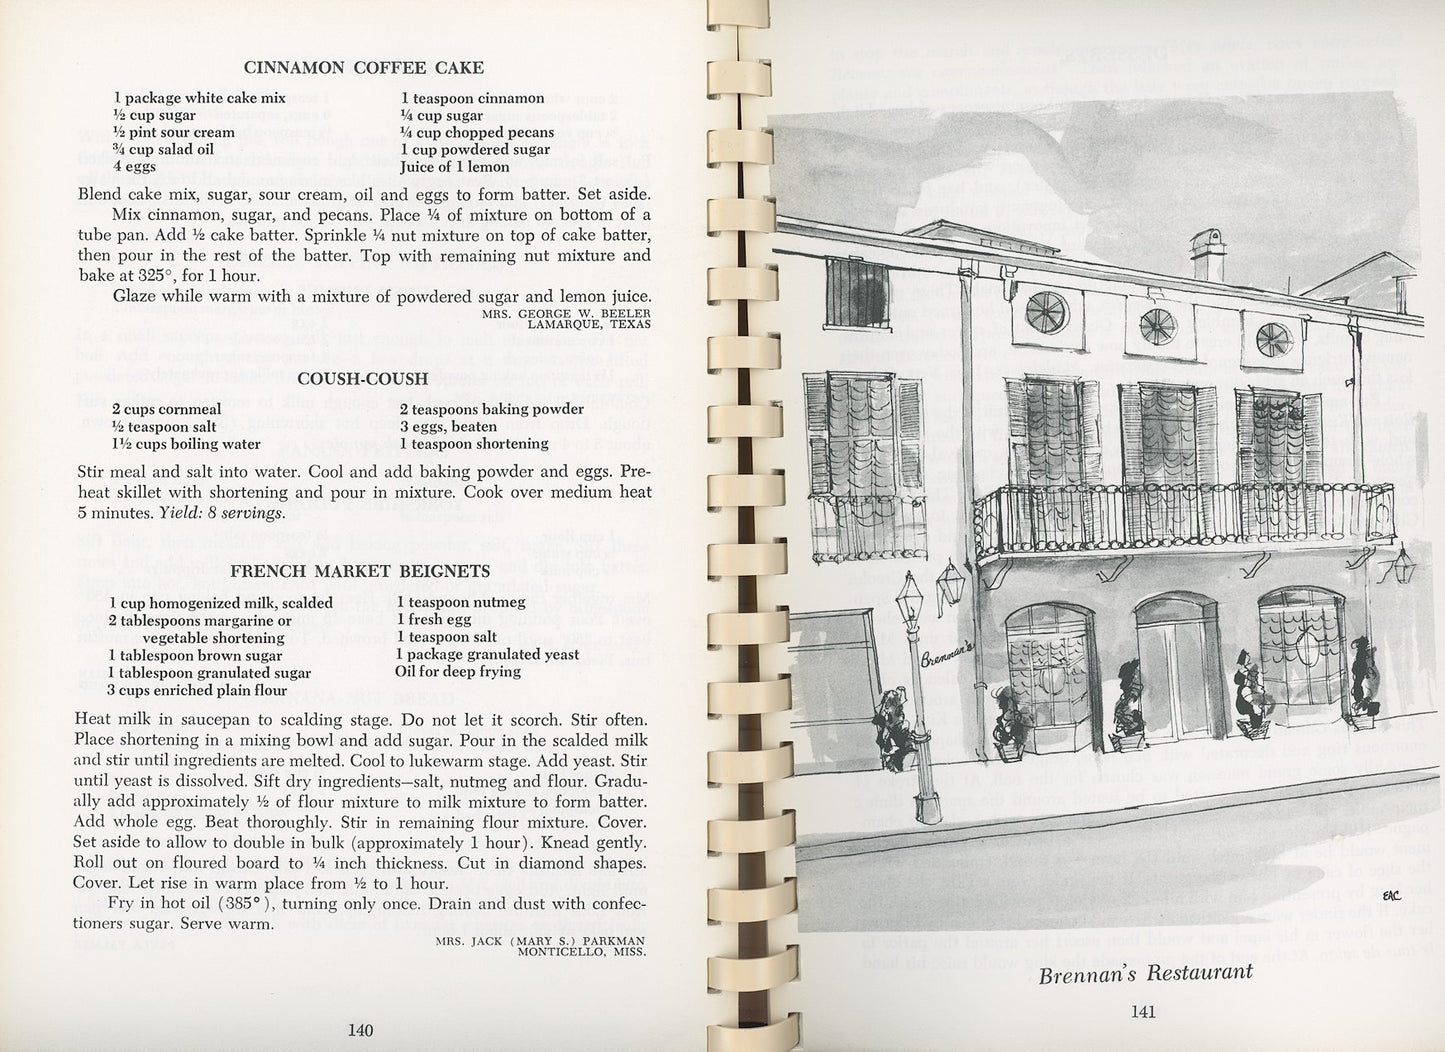 RECIPES AND REMINISCENCES OF NEW ORLEANS | Parents Club of Ursurline Academy | Southern Living Hall of Fame Winner | Copyright 1971